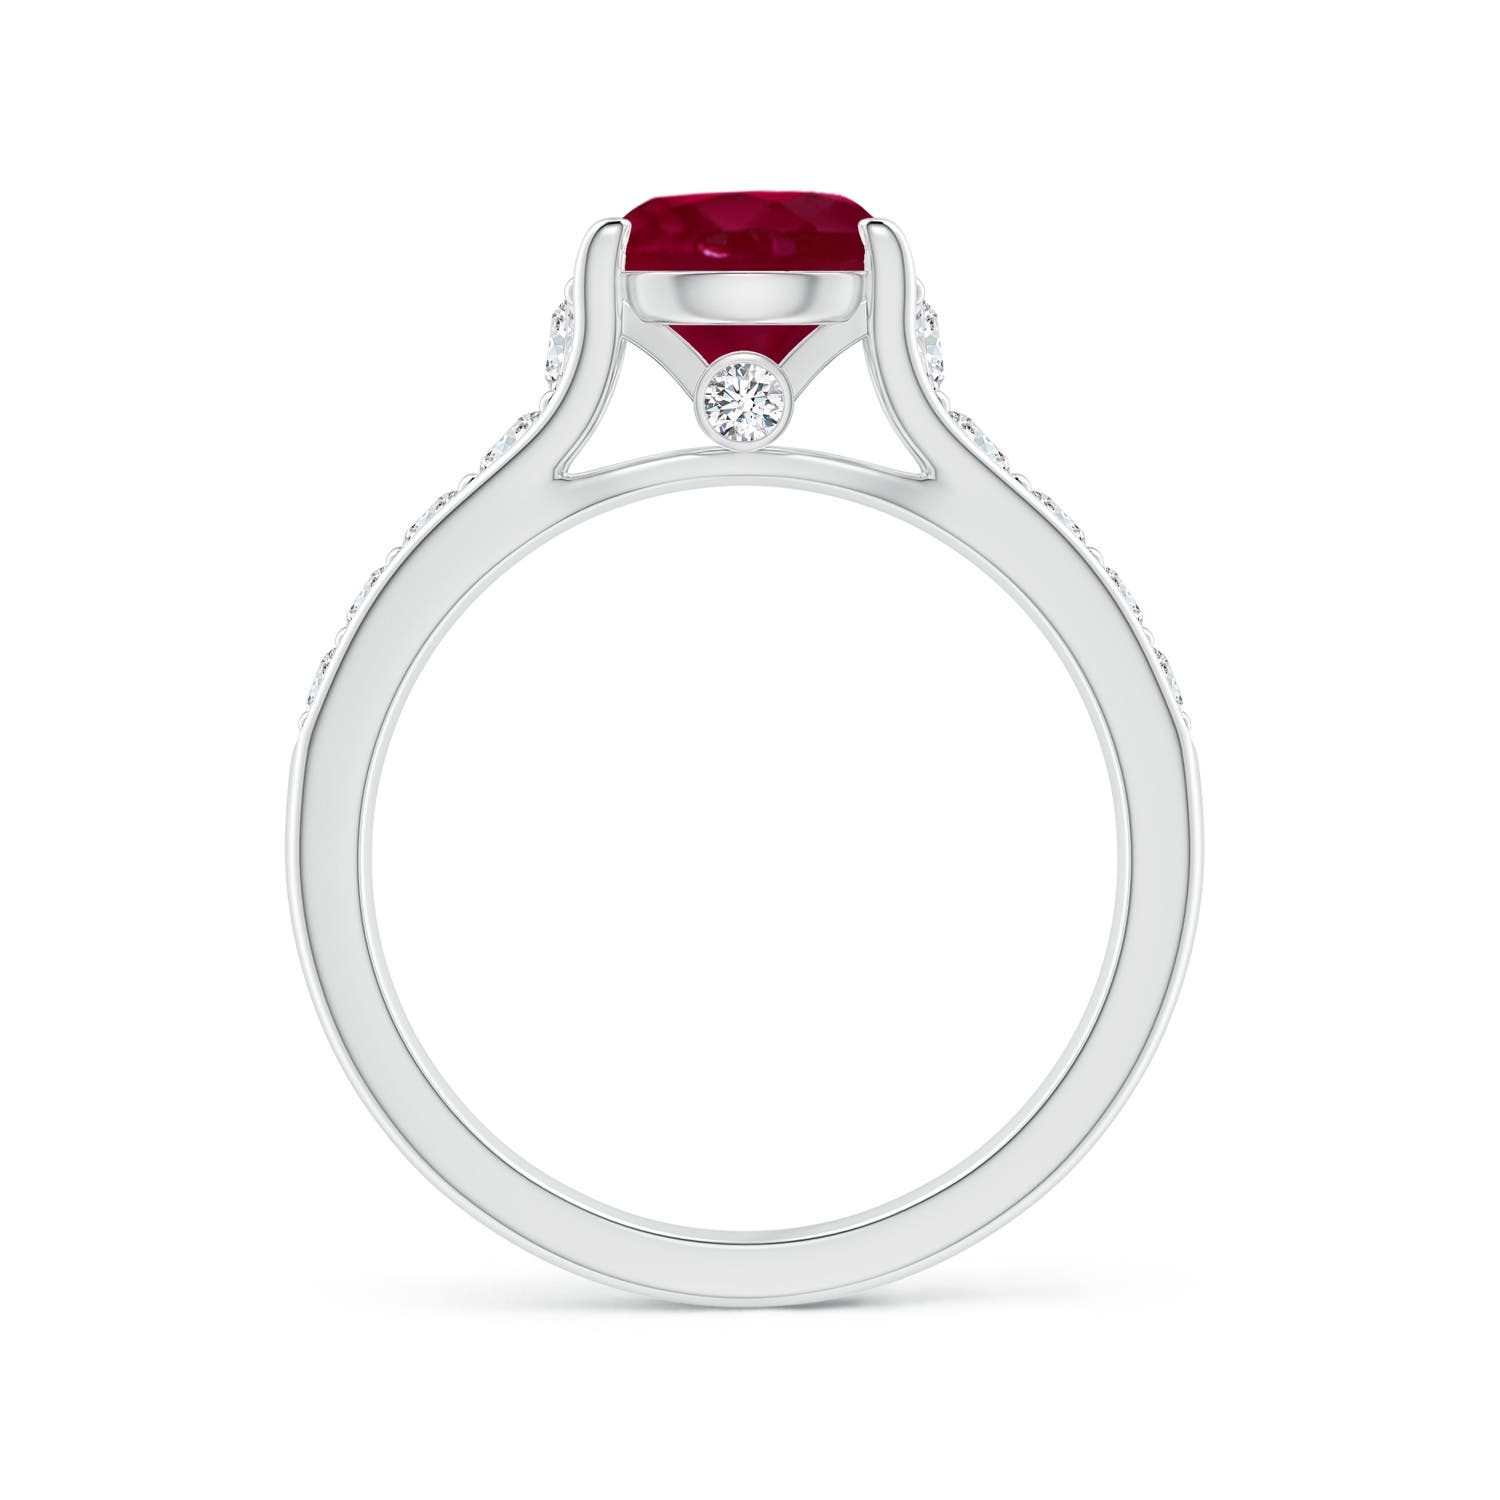 A - Ruby / 1.94 CT / 14 KT White Gold